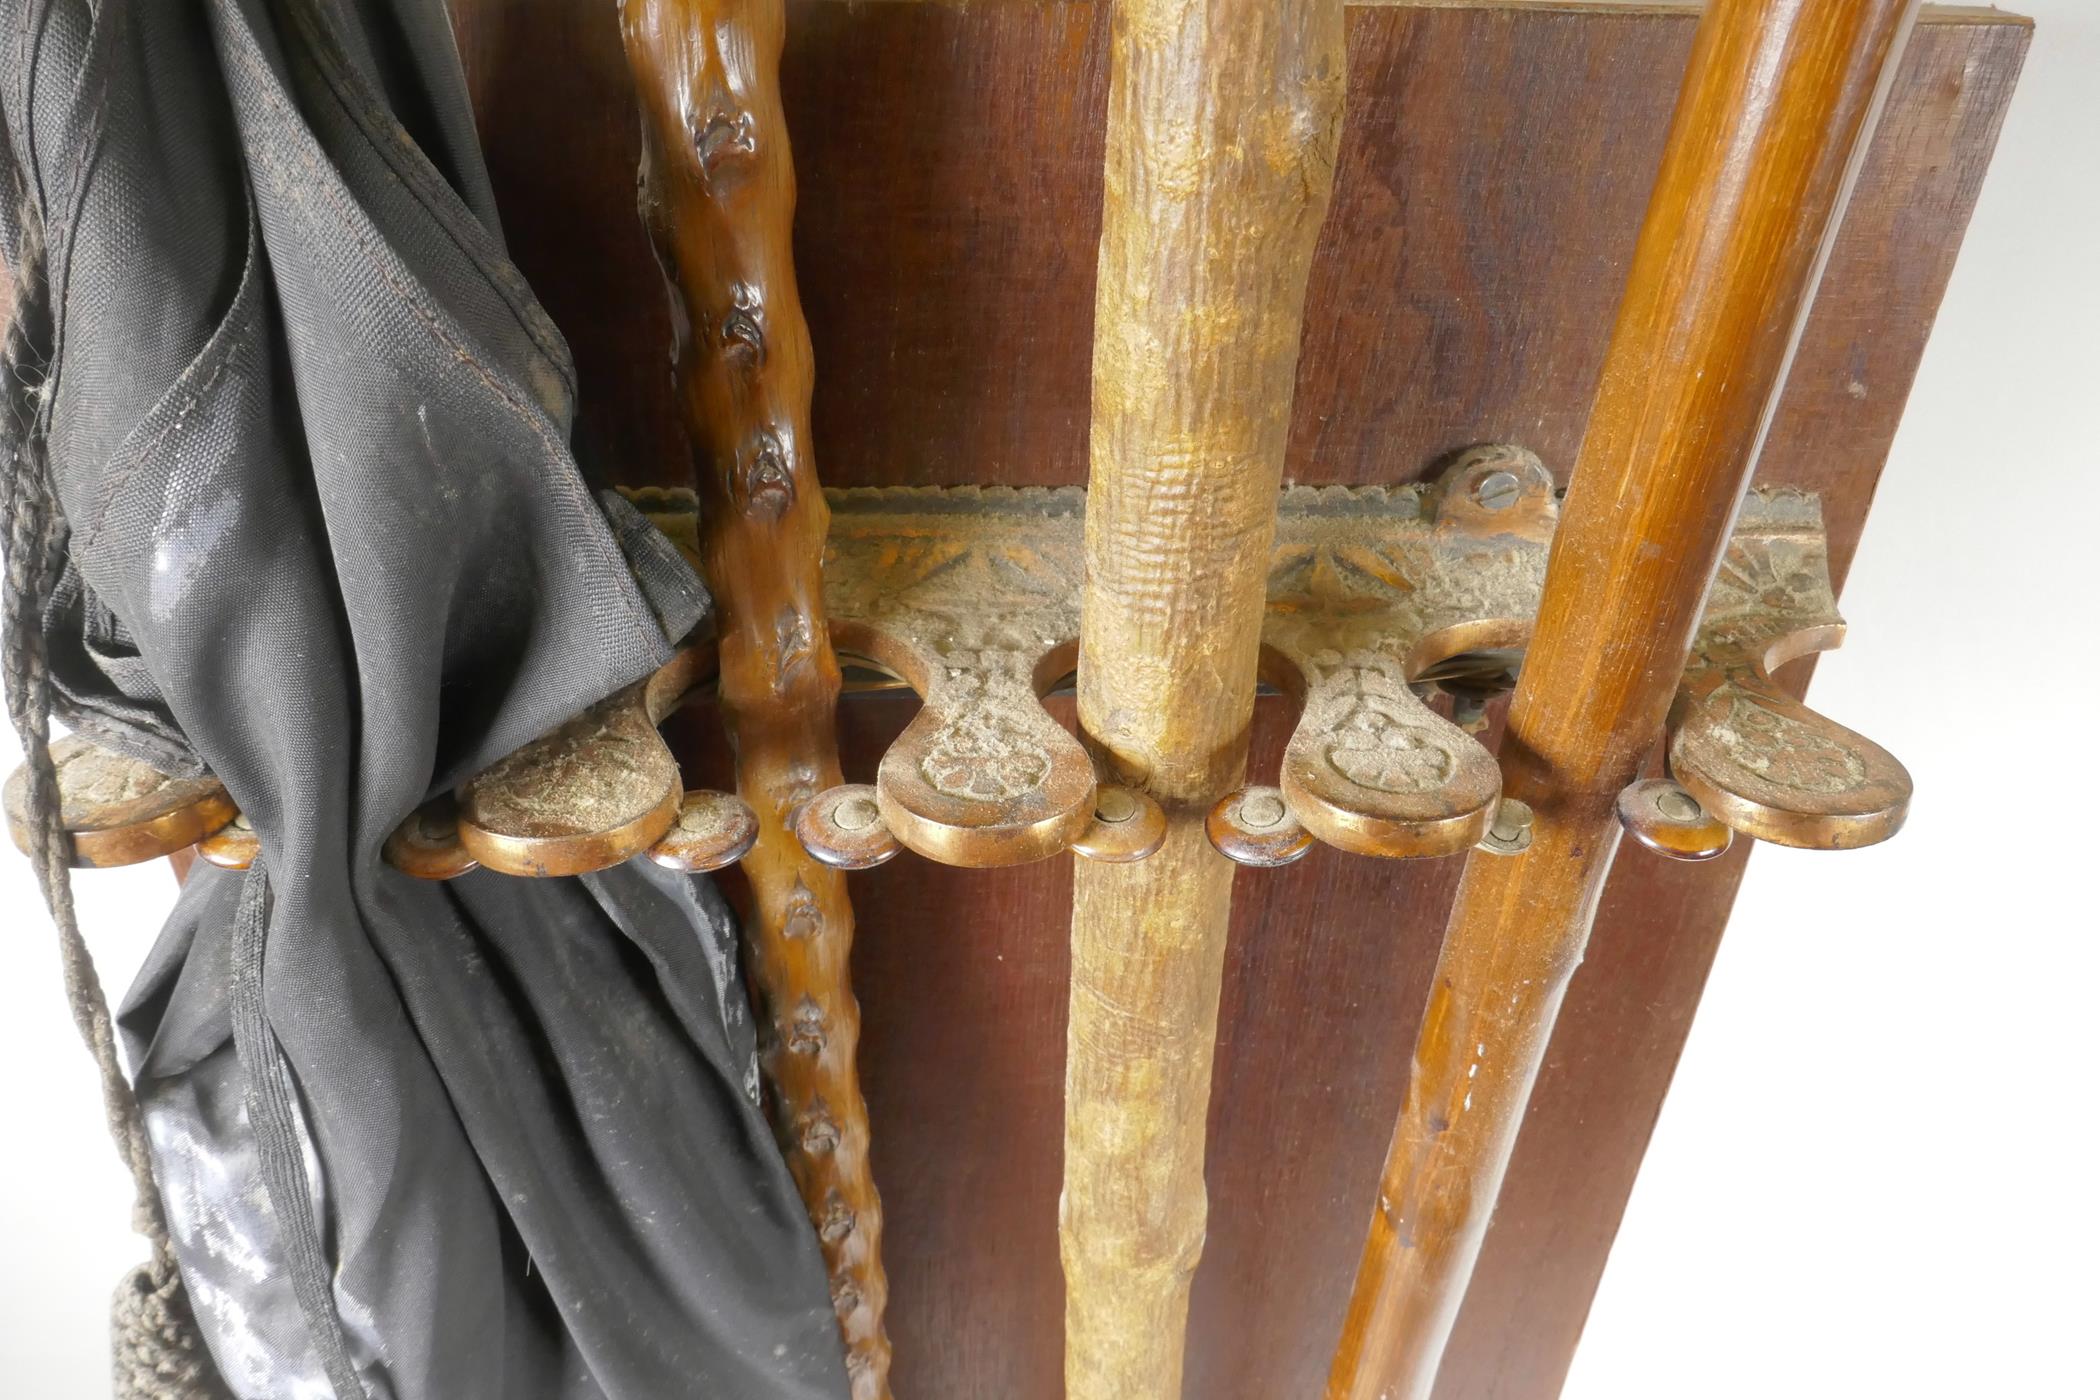 A C19th wall mounted stick stand with patent locking mechanism containing three walking sticks and - Image 2 of 5